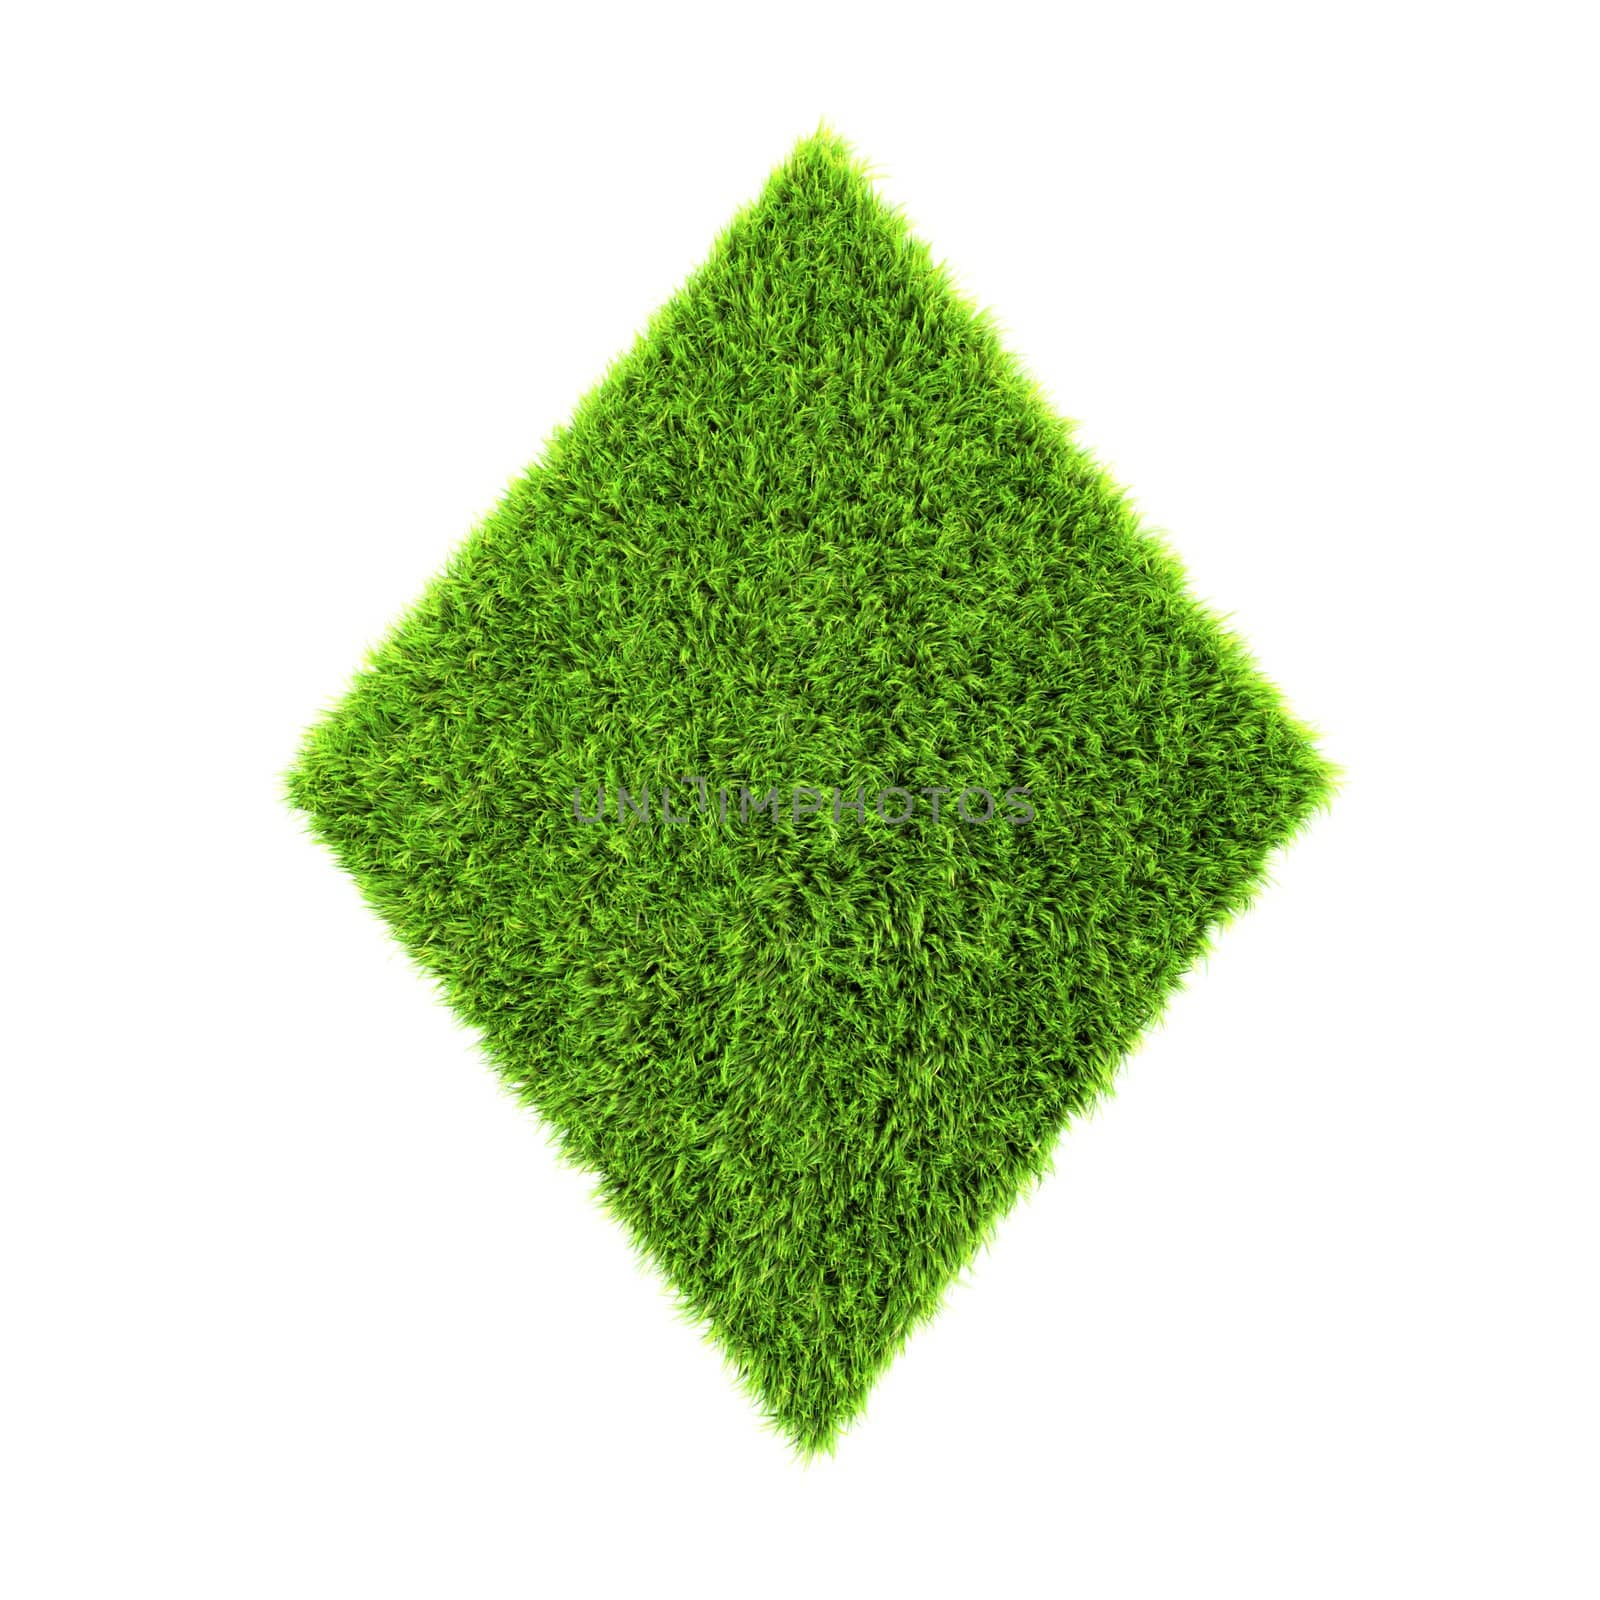 3d grass diamond isolated on a white background